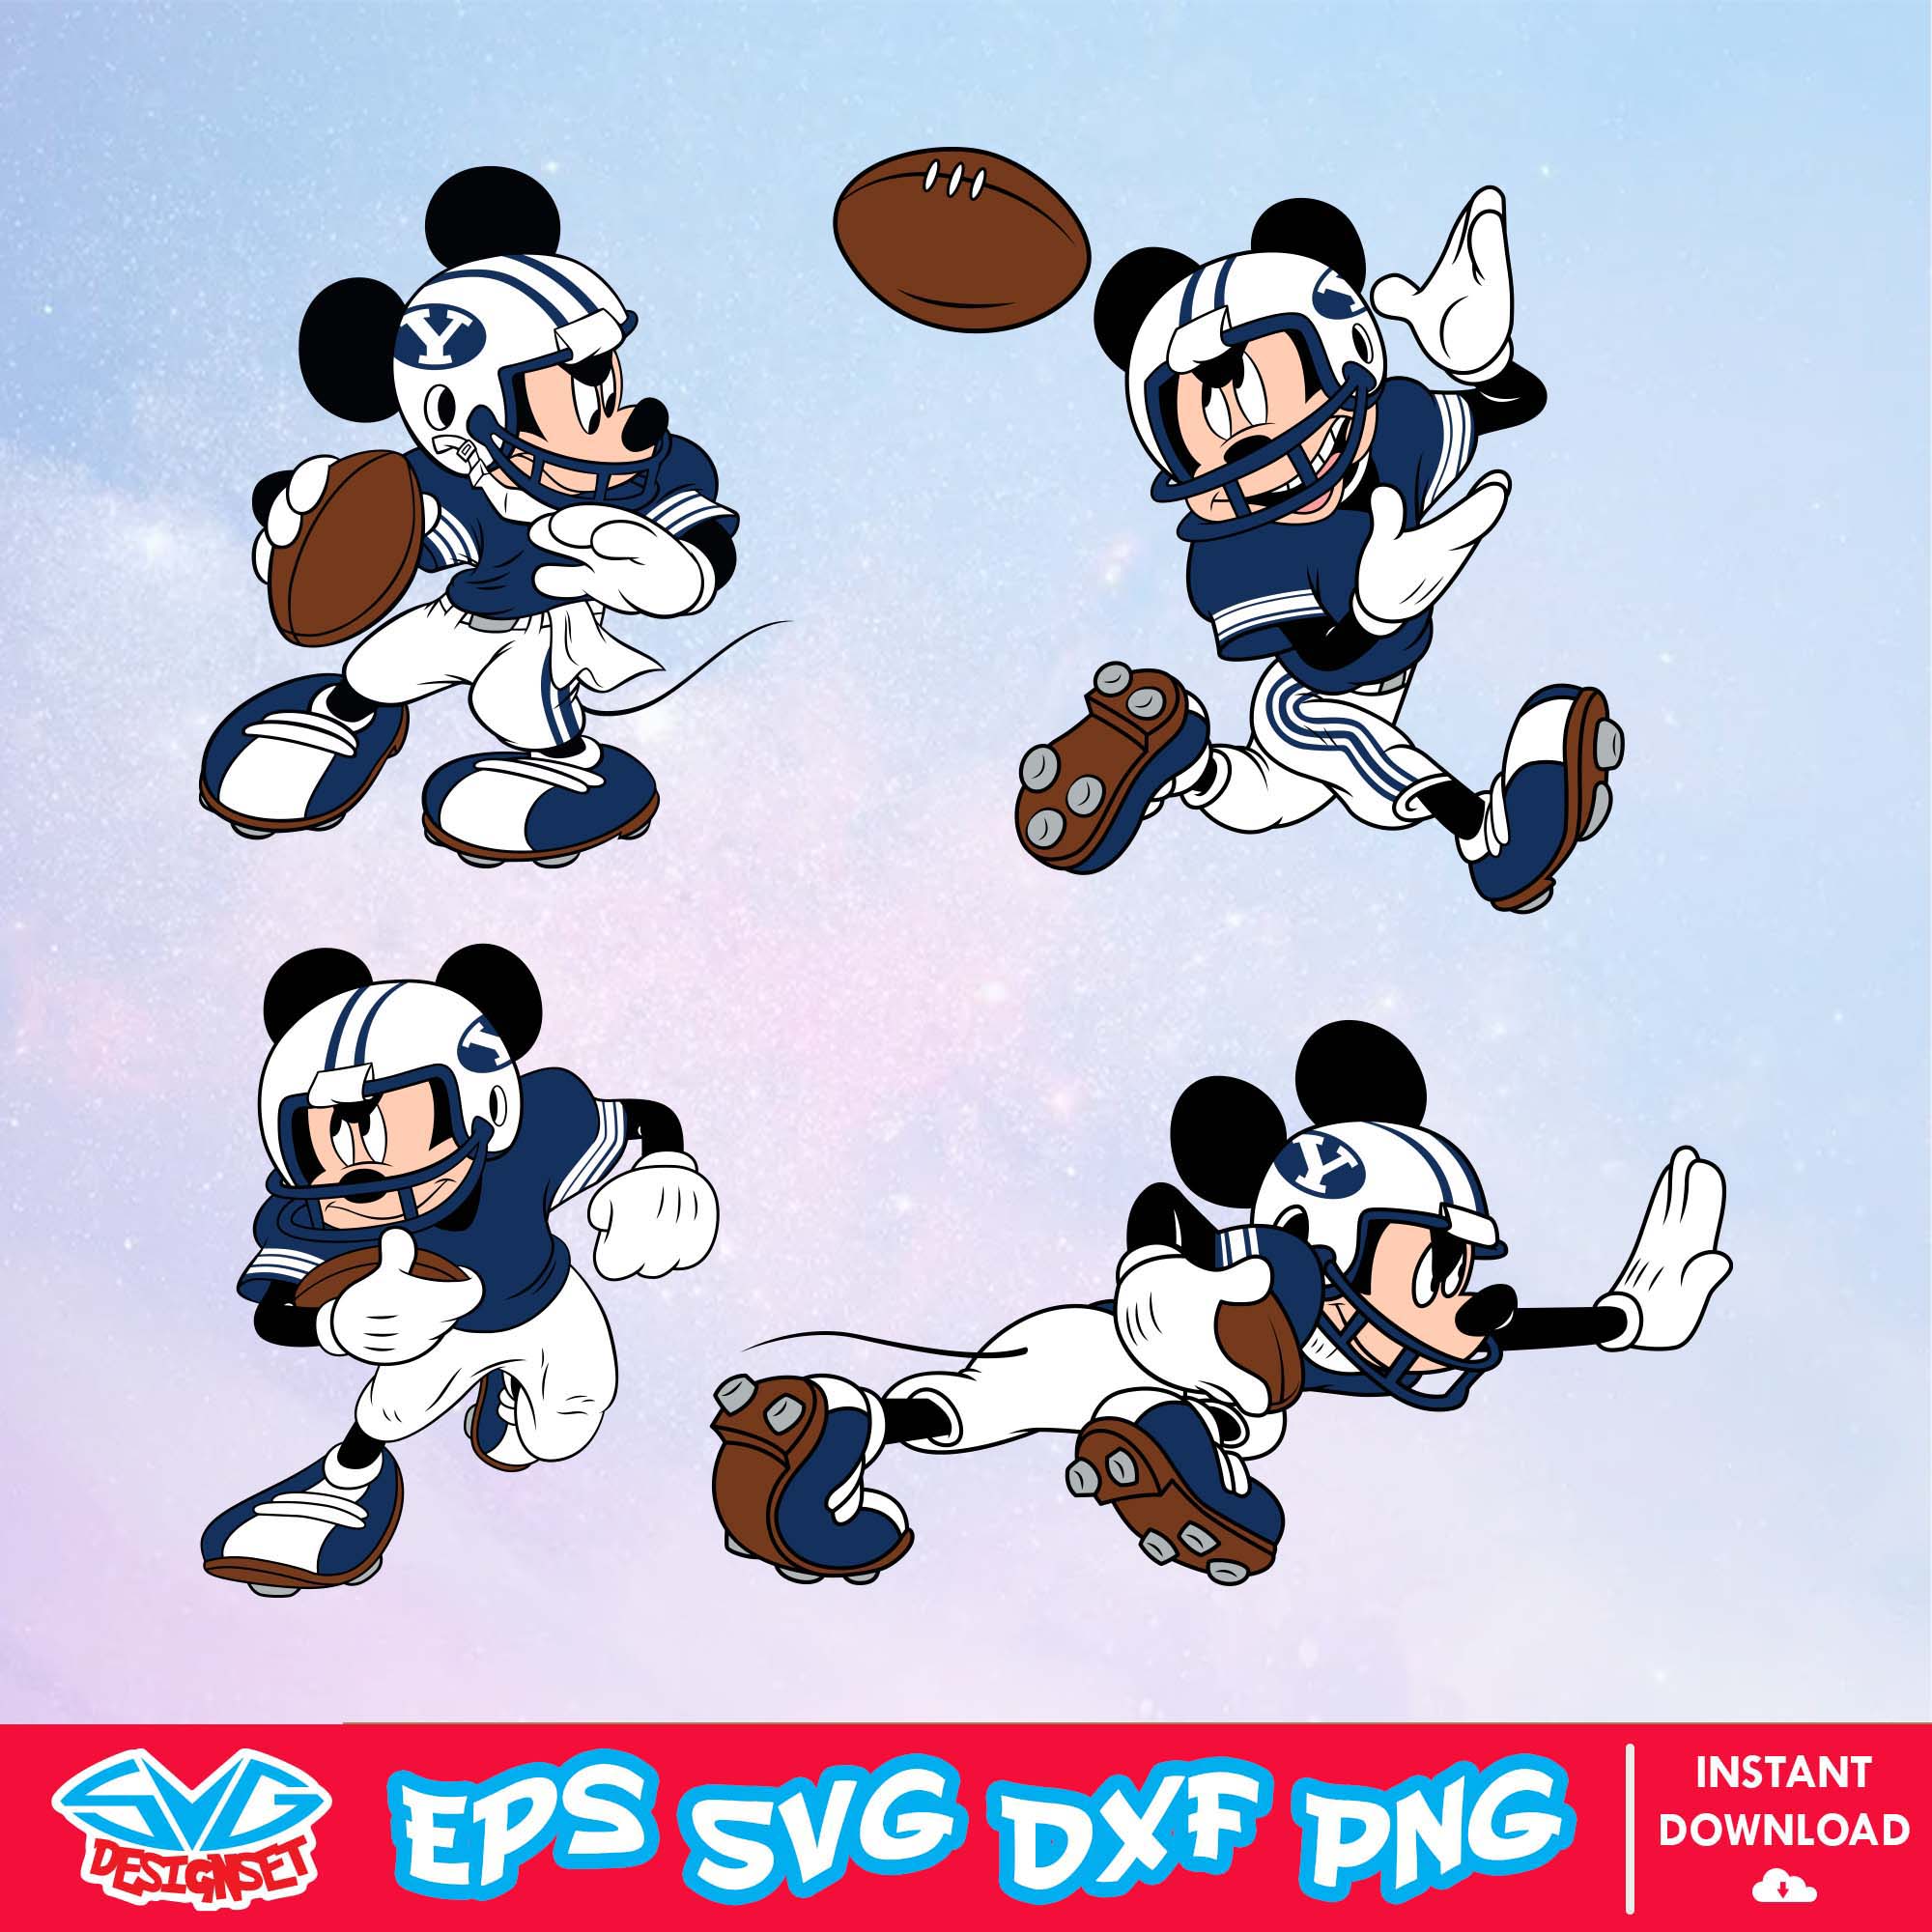 BYU Cougars Mickey Mouse Disney SVG, NCAA SVG, Disney SVG, Vector, Cricut, Cut Files, Clipart, Silhouette, Download File - SVGDesignSet